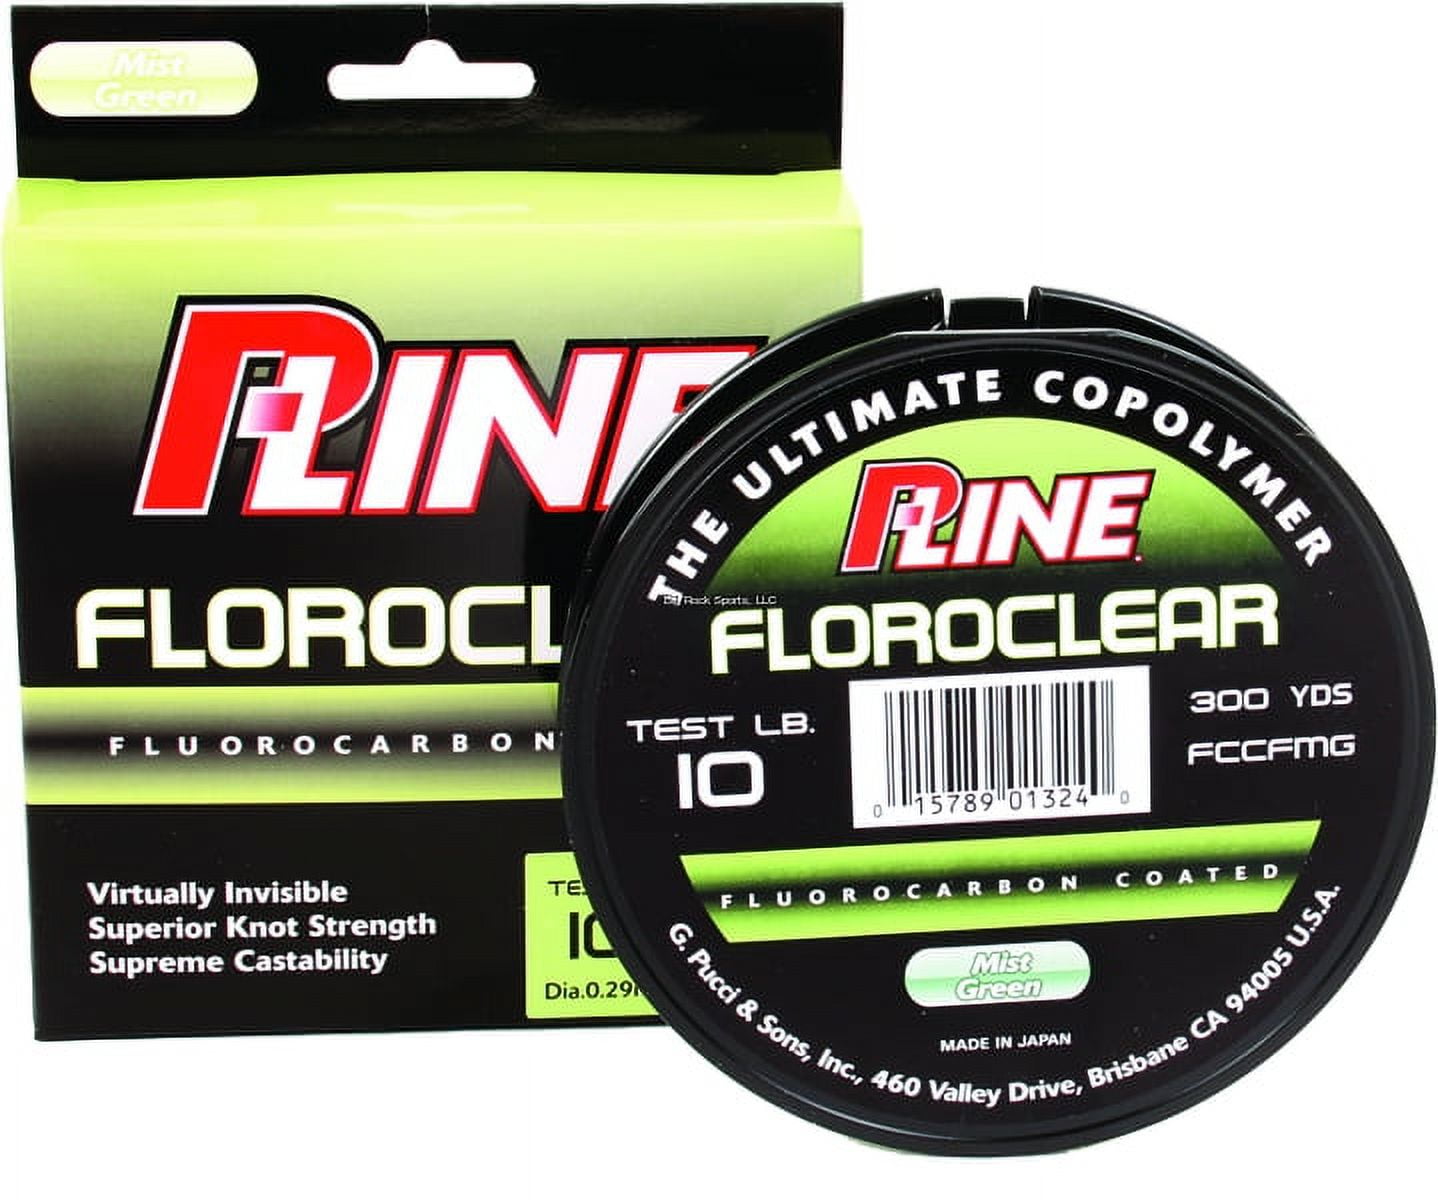 P-LINE FLOROCLEAR MIST GREEN 300 YD FISHING LINE - Northwoods Wholesale  Outlet